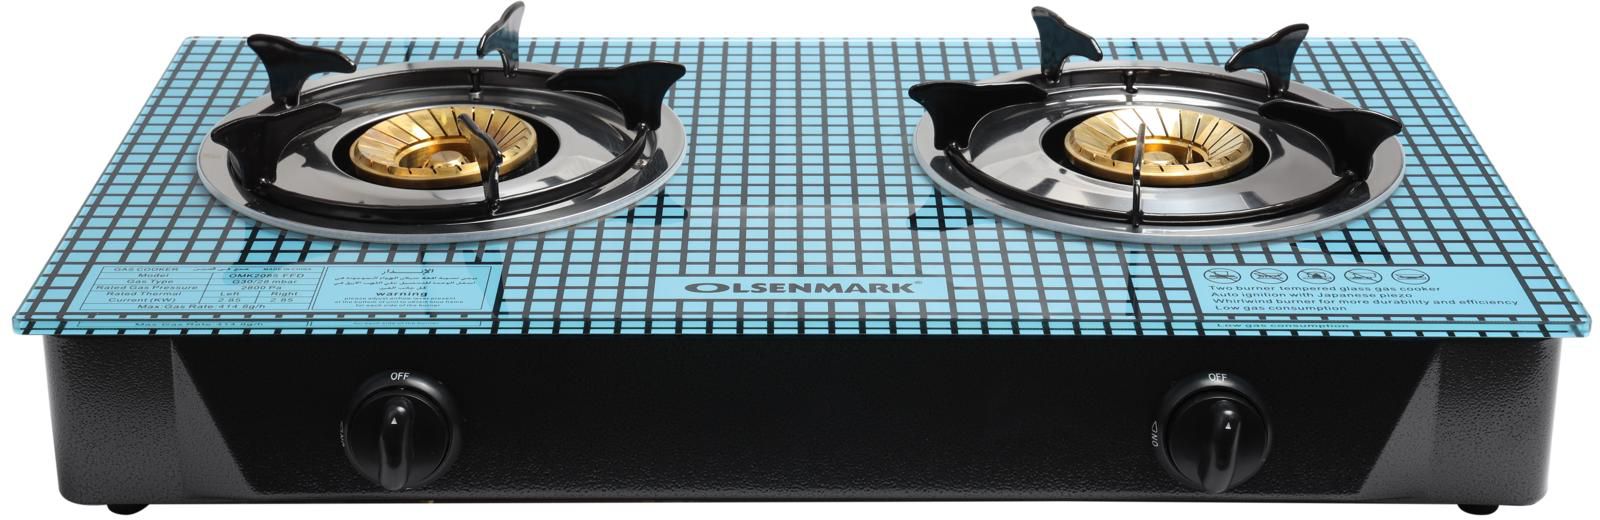 Olsenmark Double Burner Gas Stove - Auto Ignition - Toughened Glass - Low Gas Consumption | 2 Years Warranty